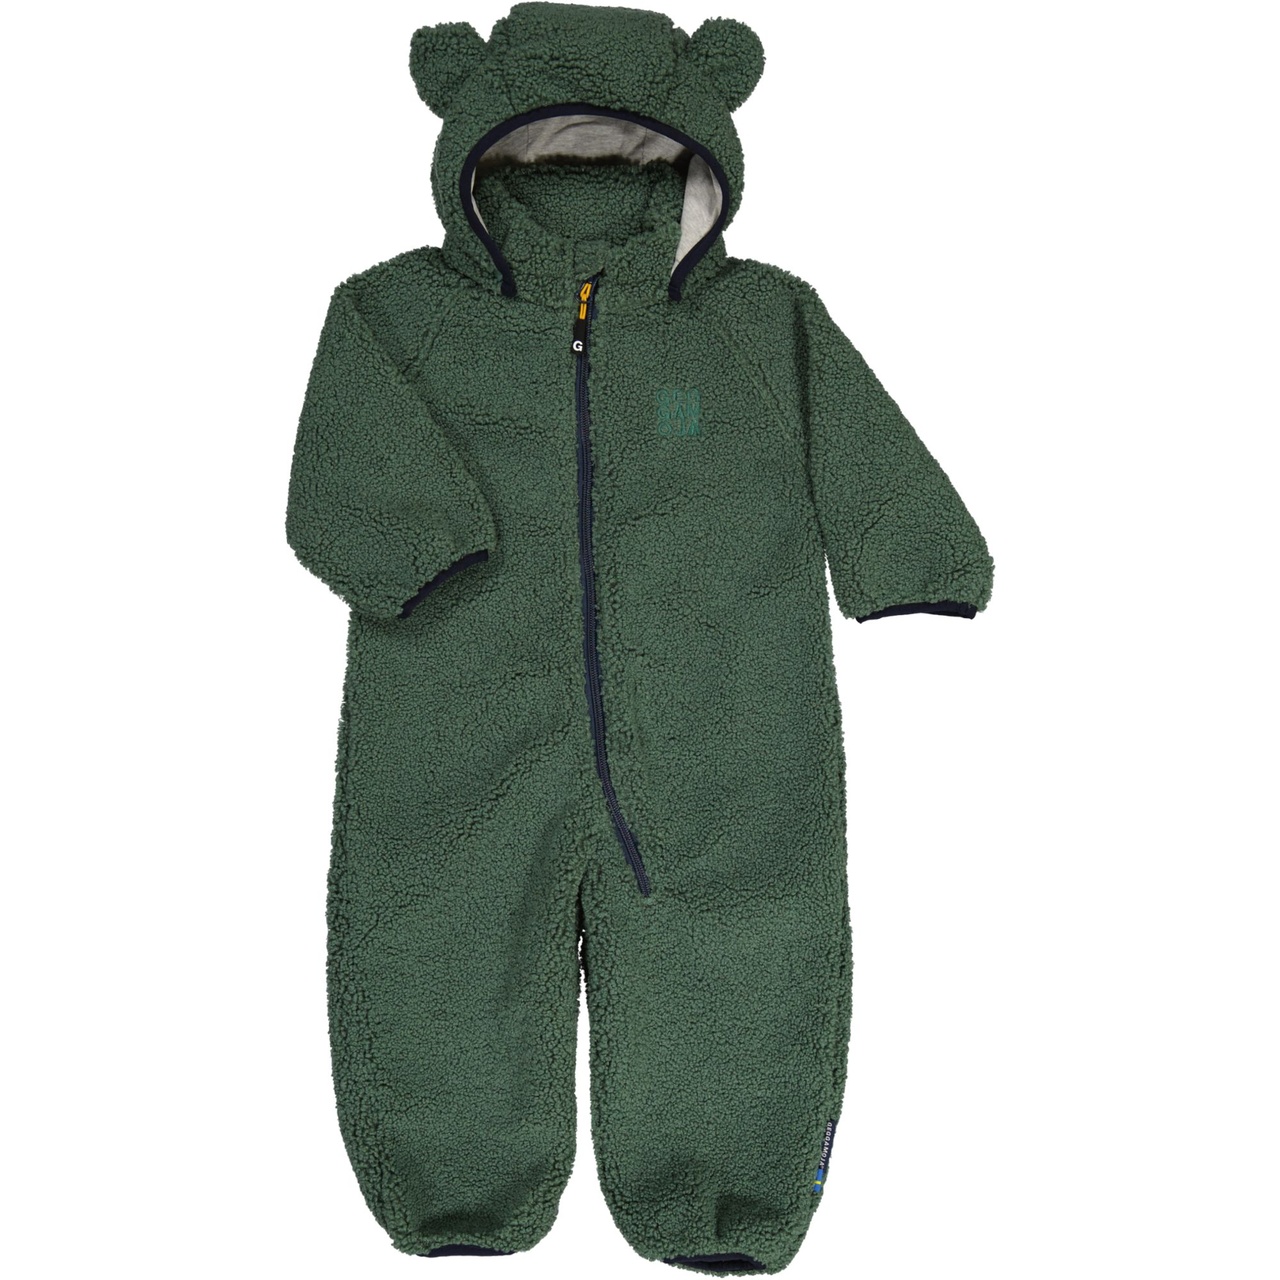 Pile overall Moss green  74/80